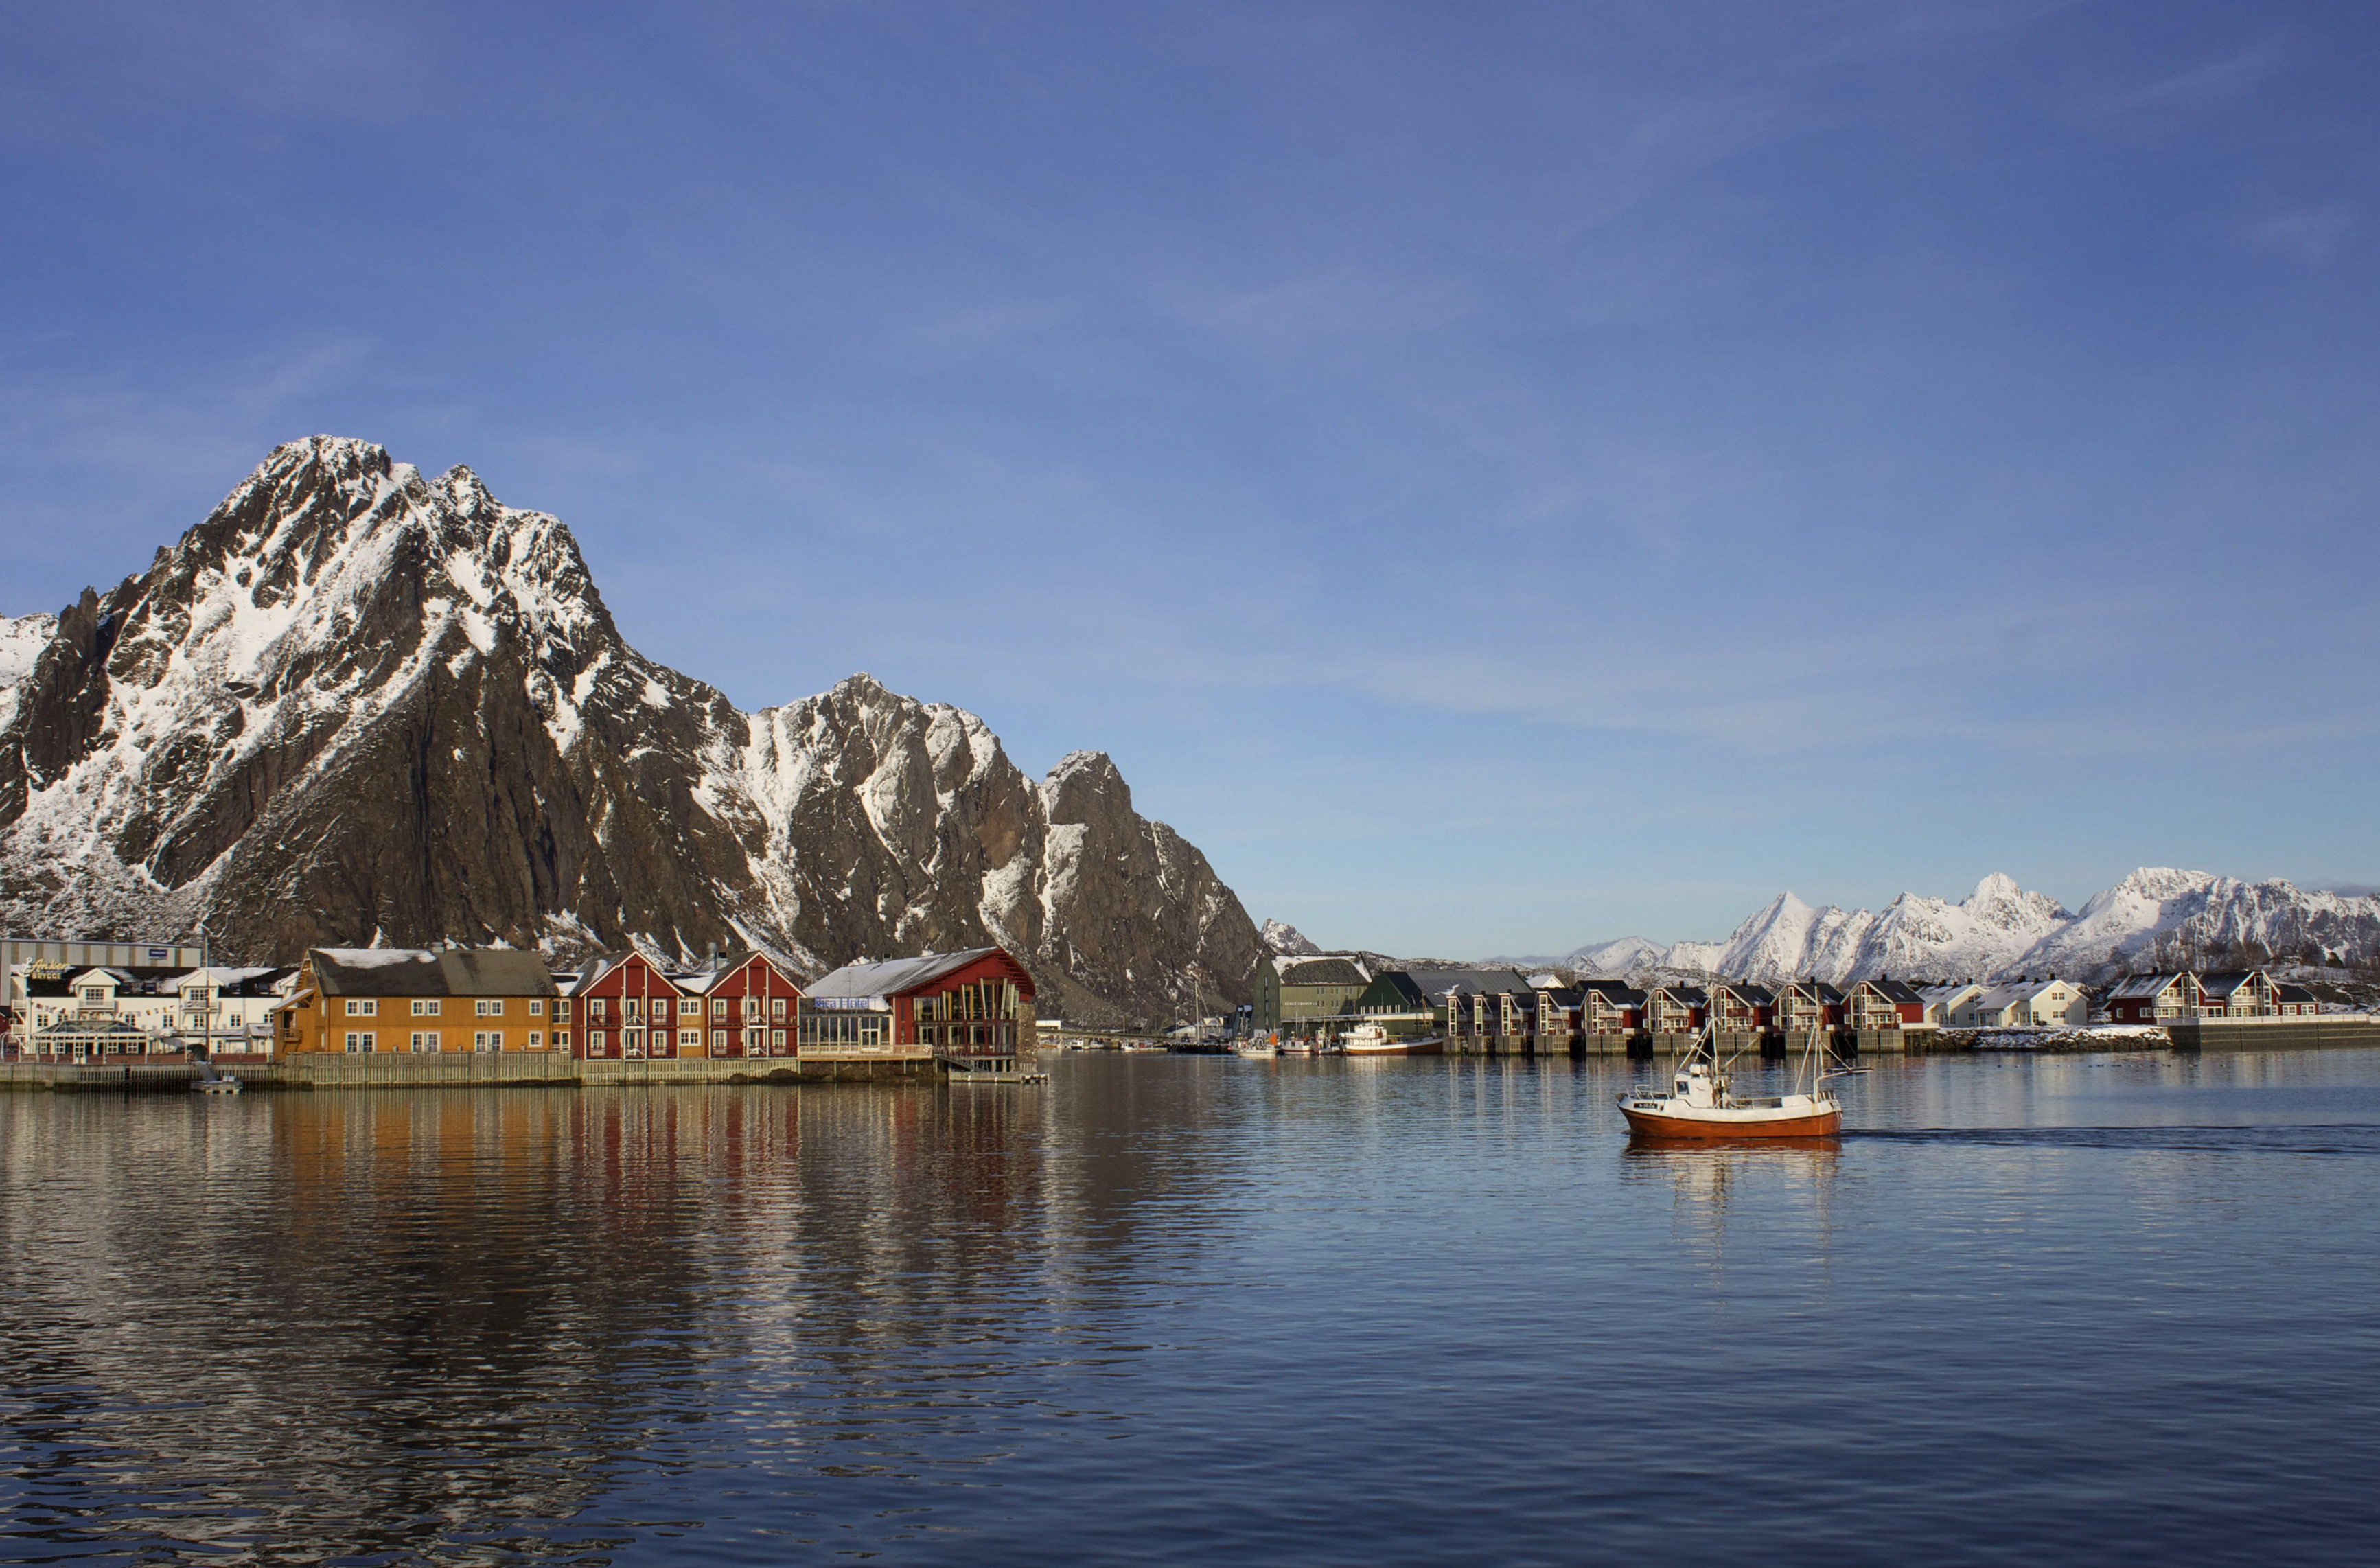 A fishing boat enters the harbor at the Arctic port of Svolvaer in northern Norway